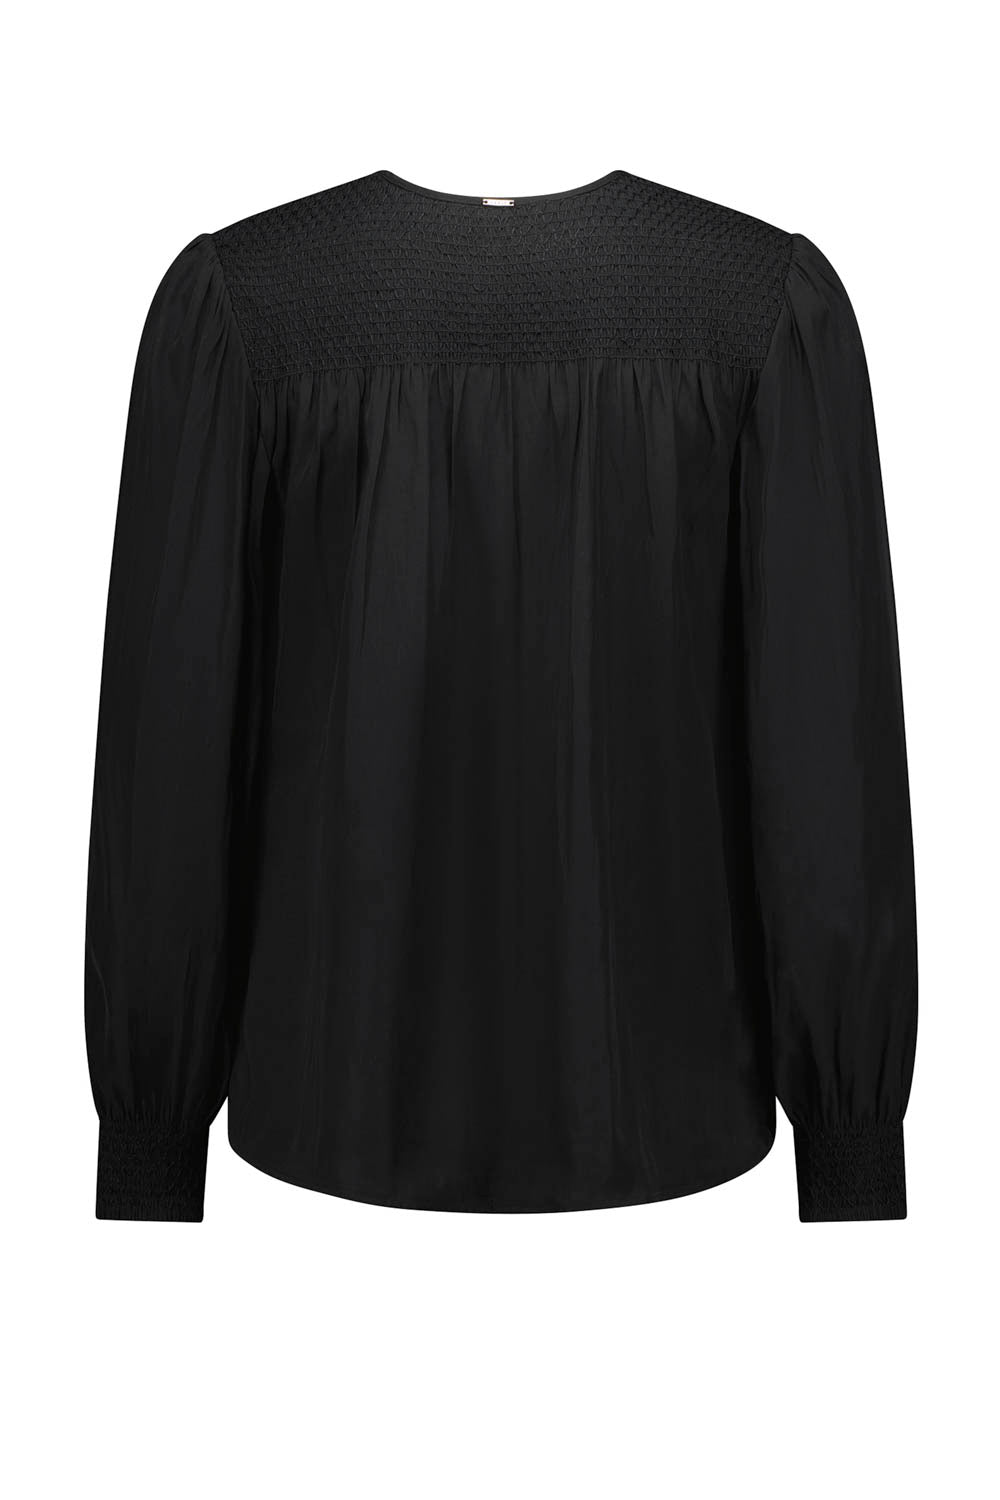 Glide by Verge - Tangled Blouse - Black - Blouse VERGE